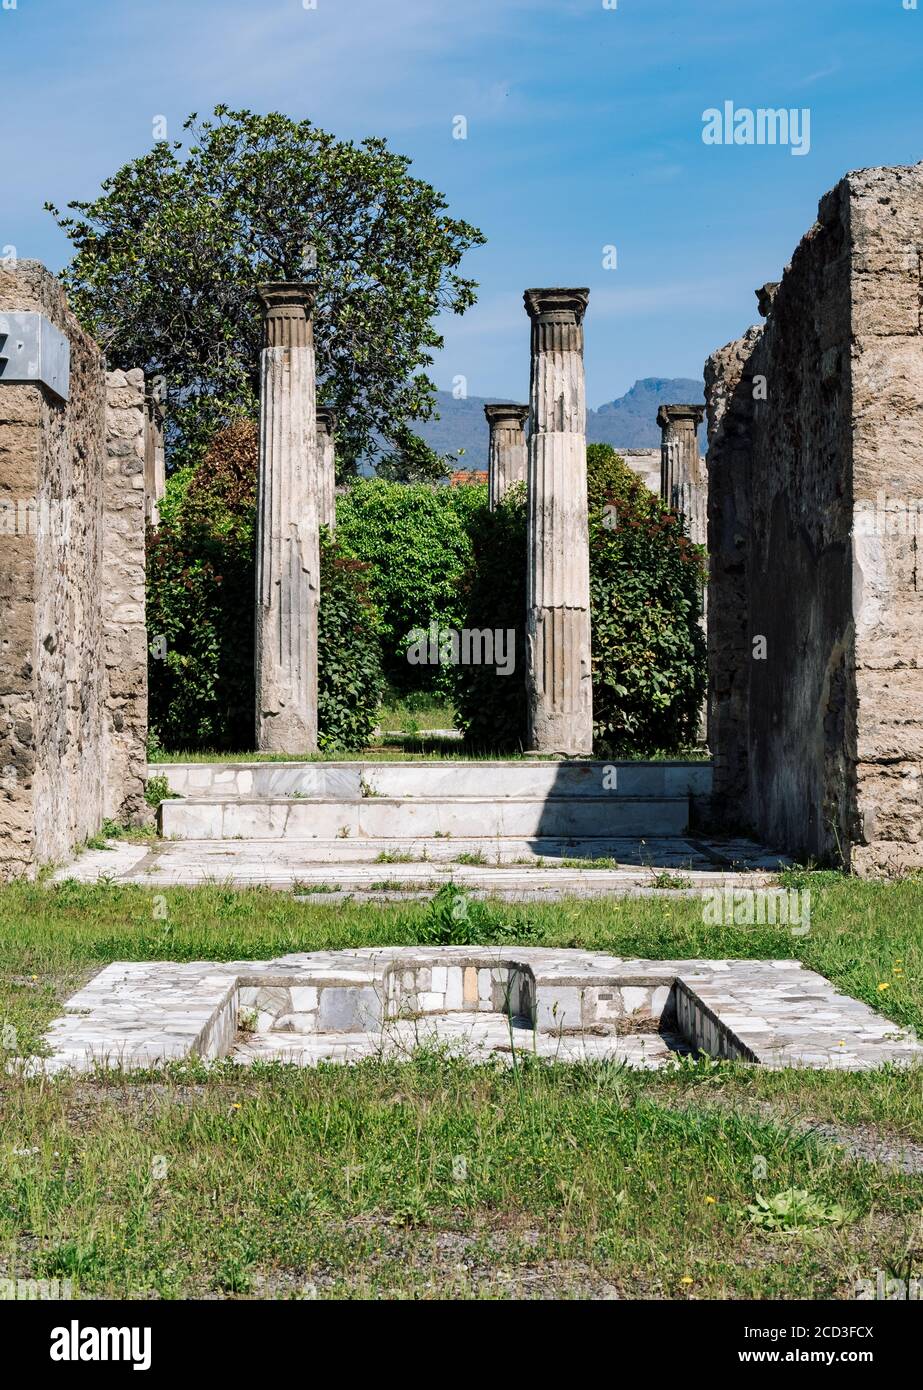 ruins of an ancient Roman house in Pompeii destroyed by the eruption of Vesuvius in 79 BC, Italy Stock Photo